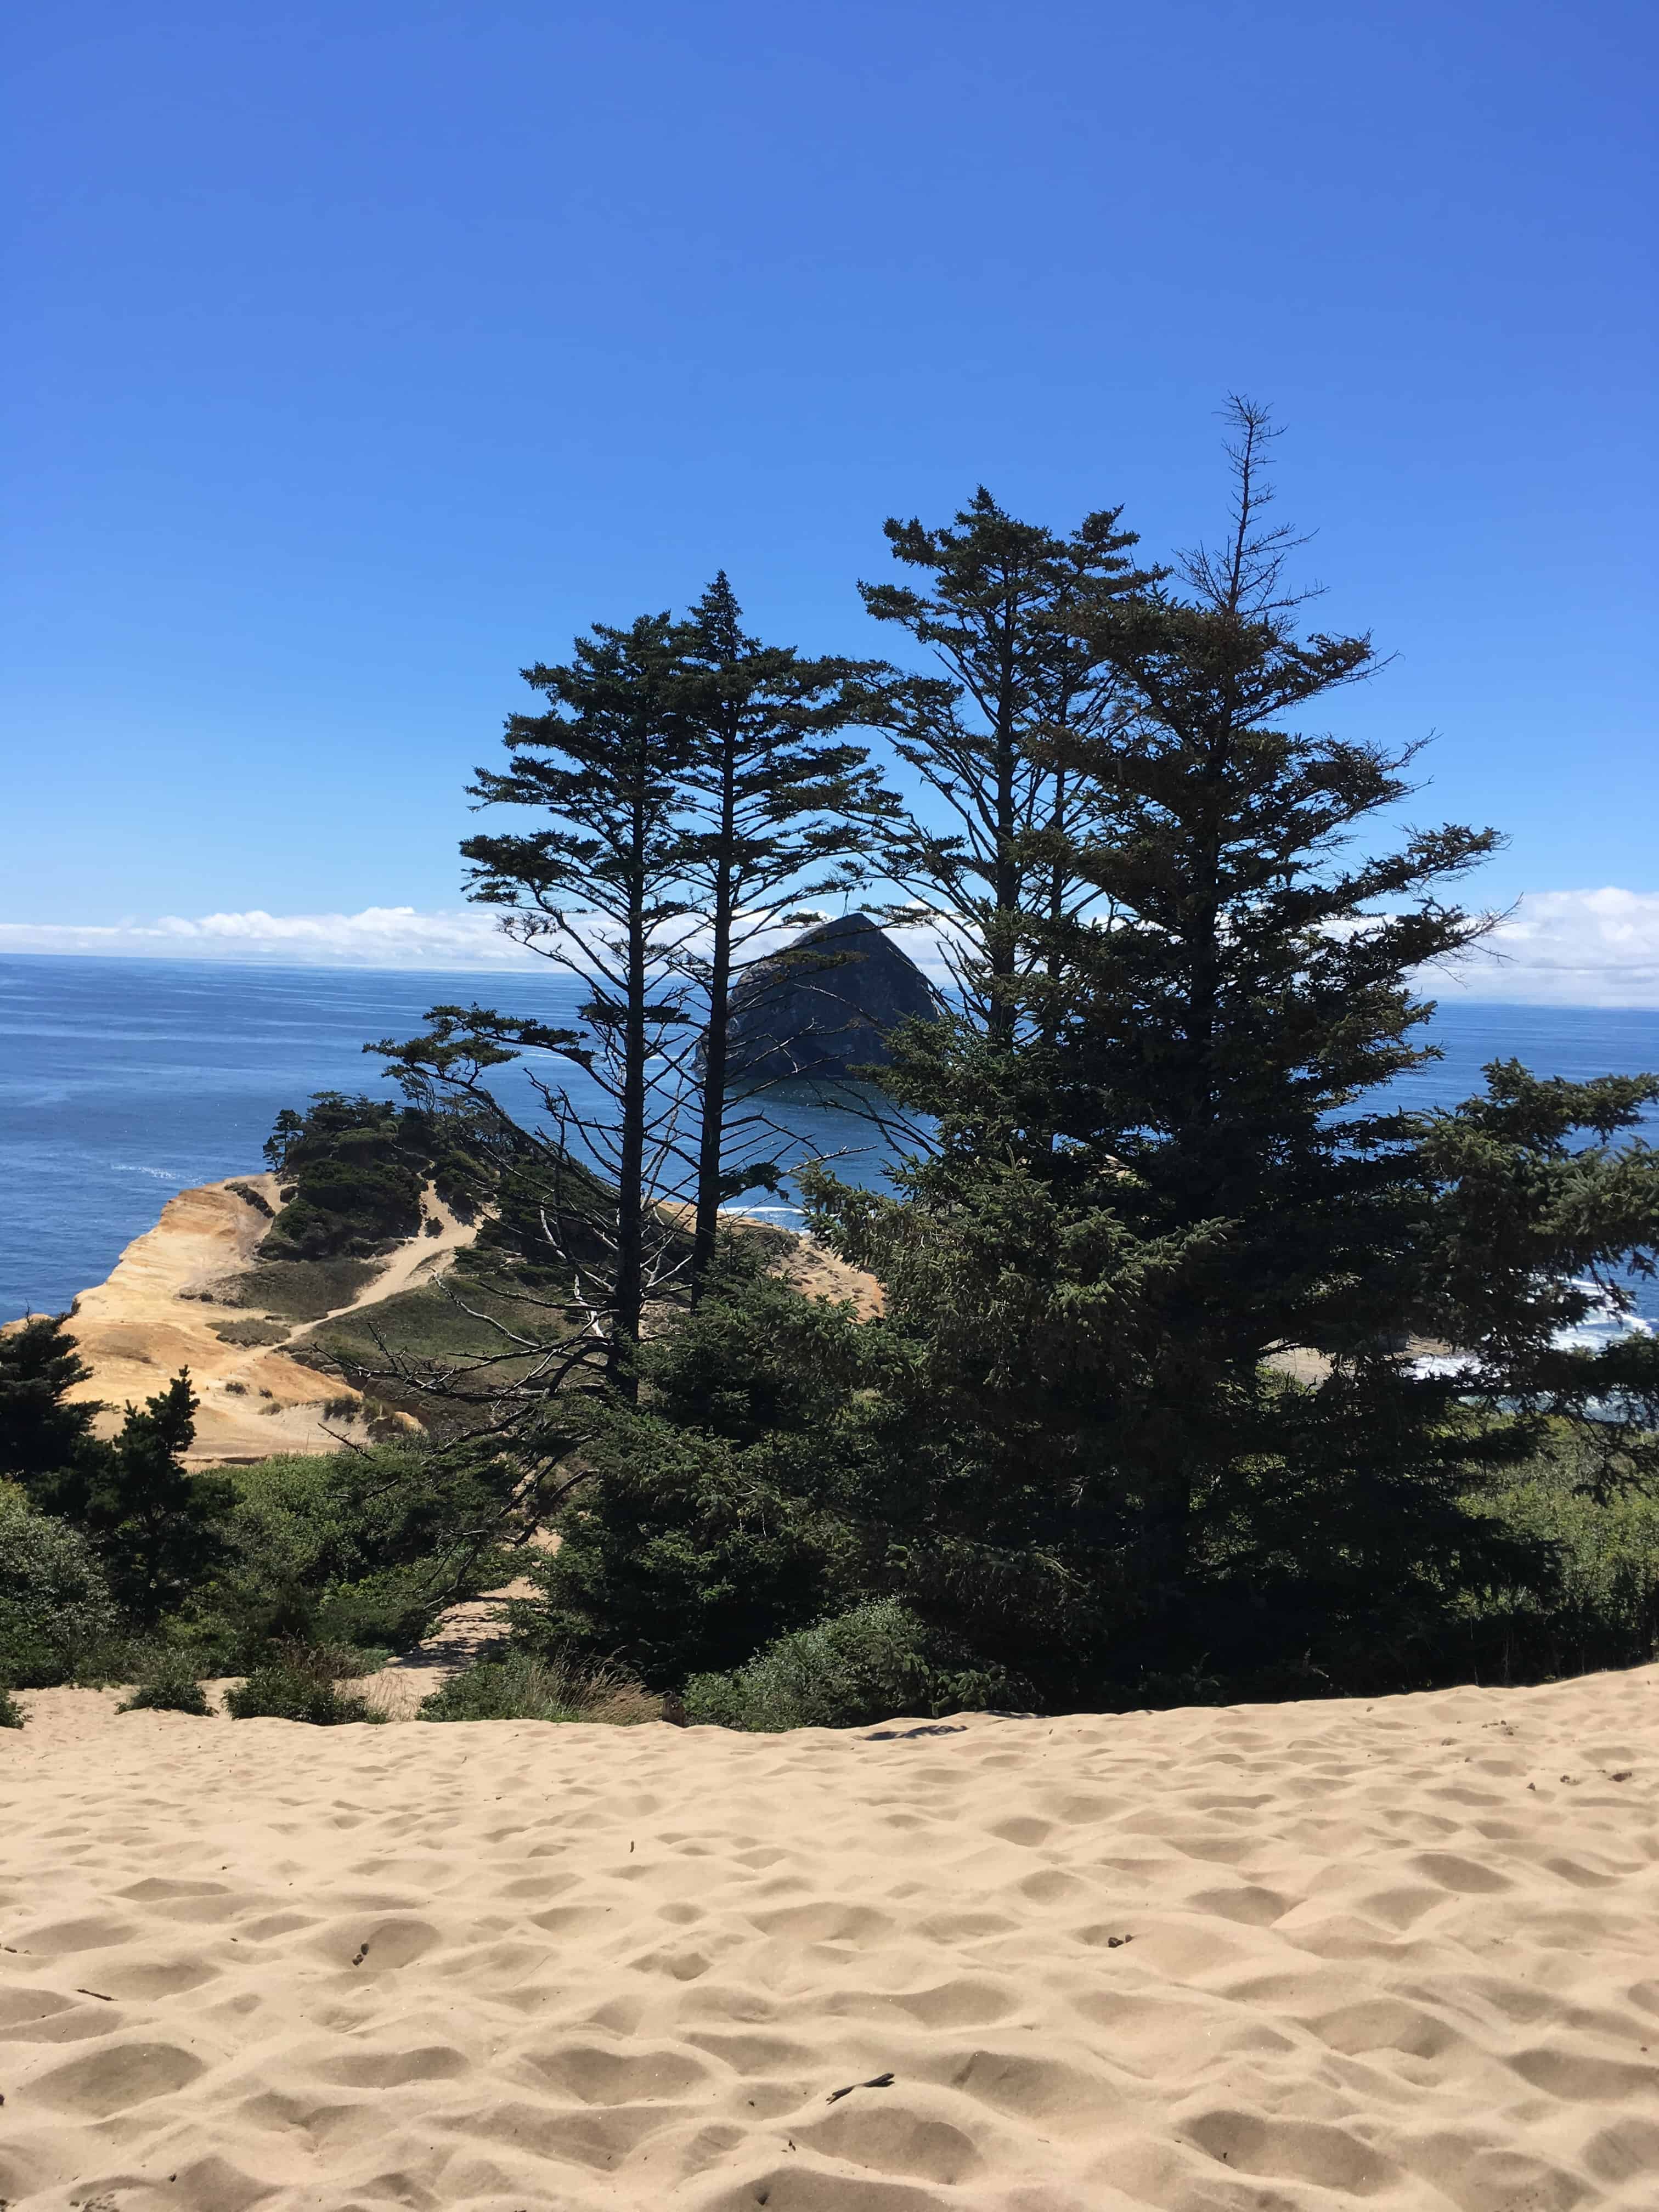 View from the top of the Cape Kiwanda sand dune in Pacific City Oregon with kids.